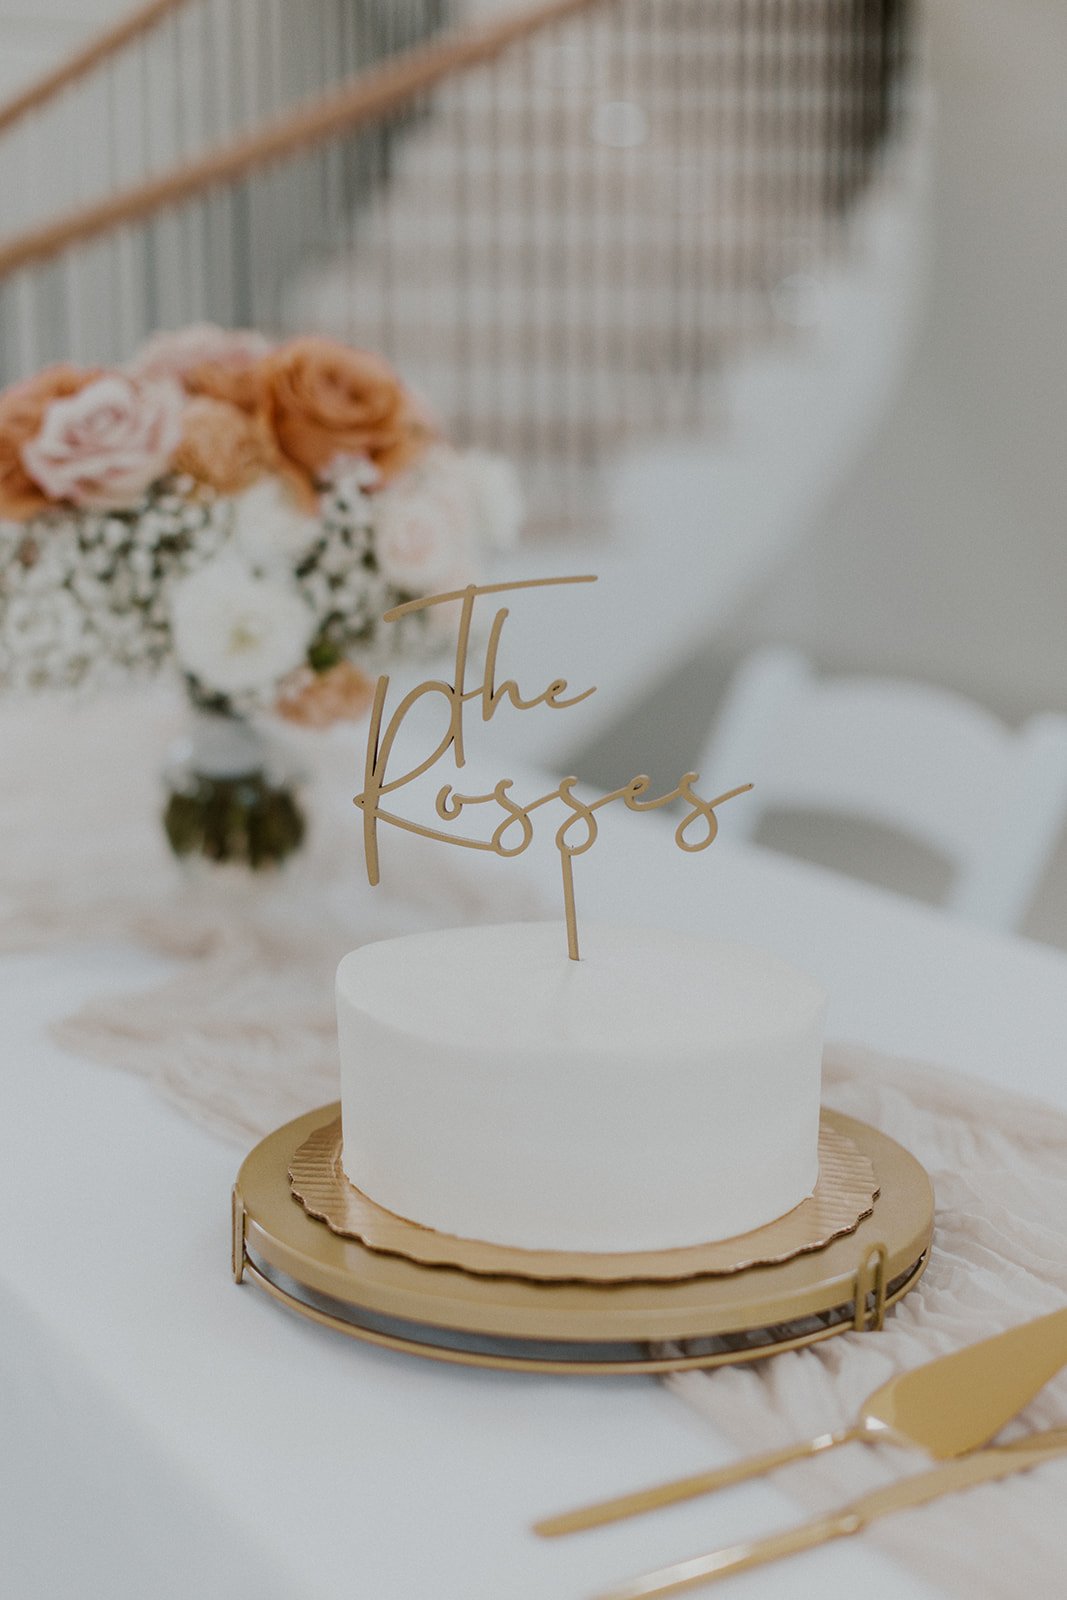 Simple, clean white cake with "The Ross's" cake topper.